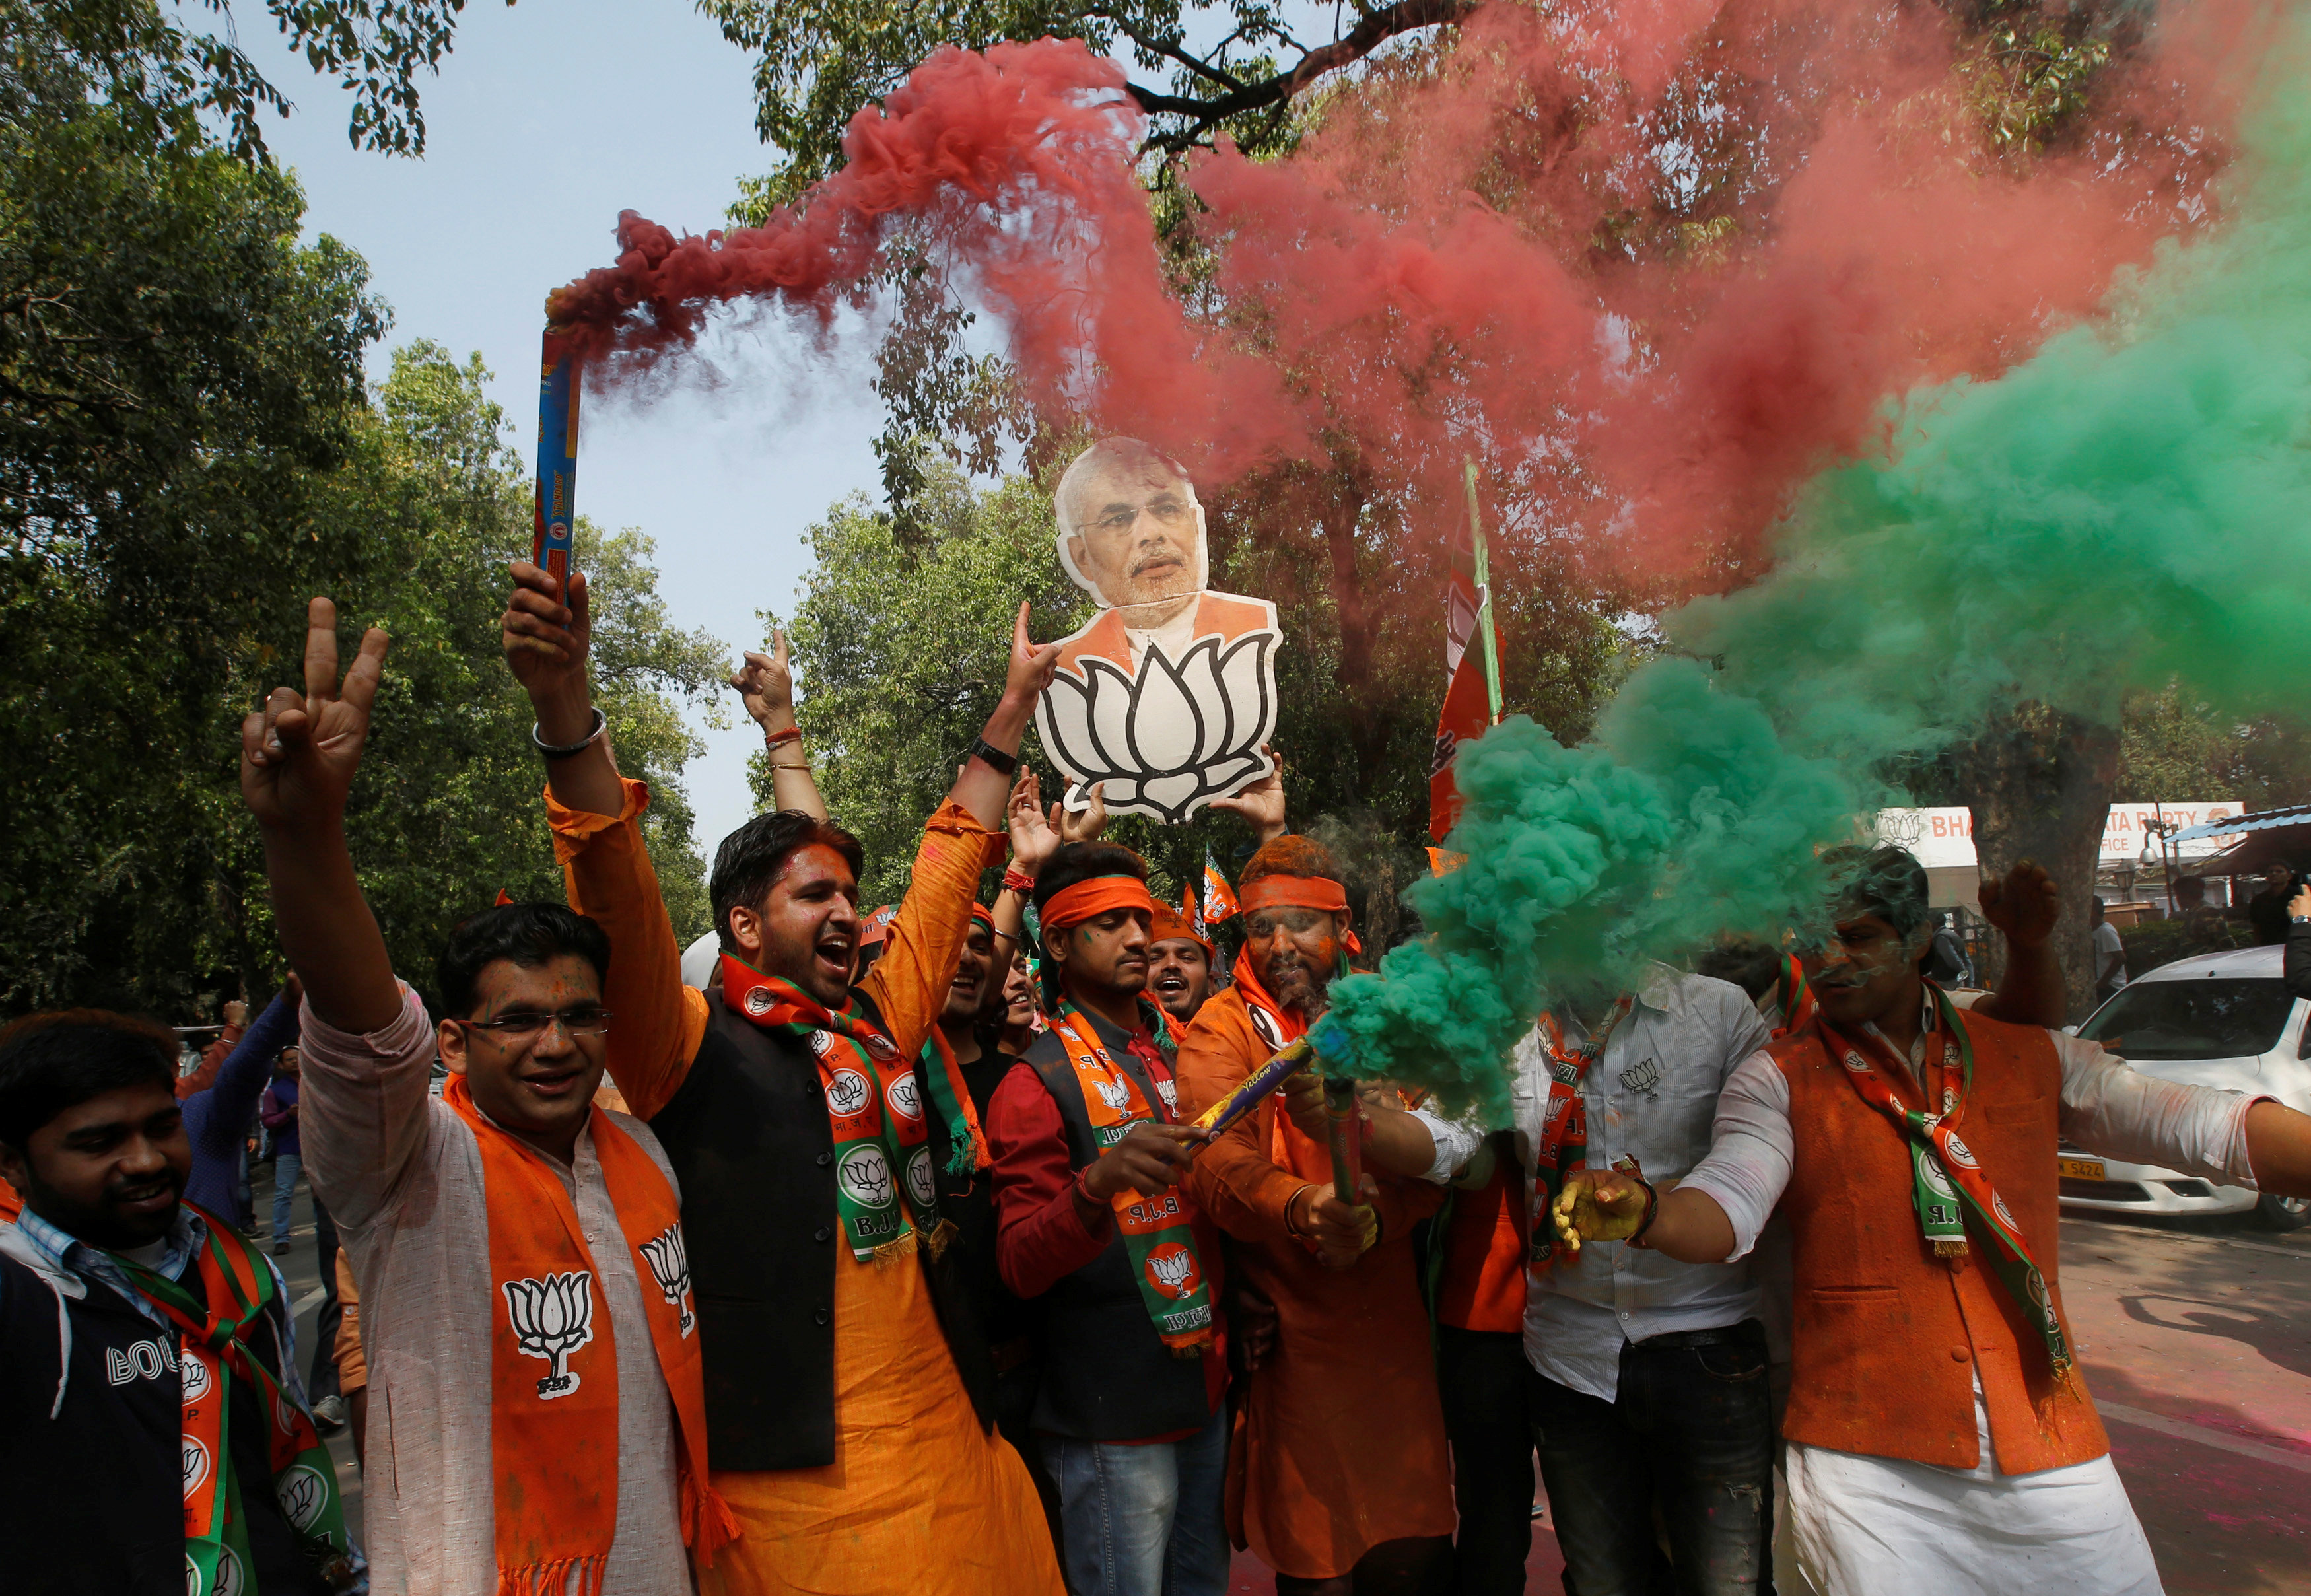 State Elections: Indian prime minister's party on course for landslide in Uttar Pradesh